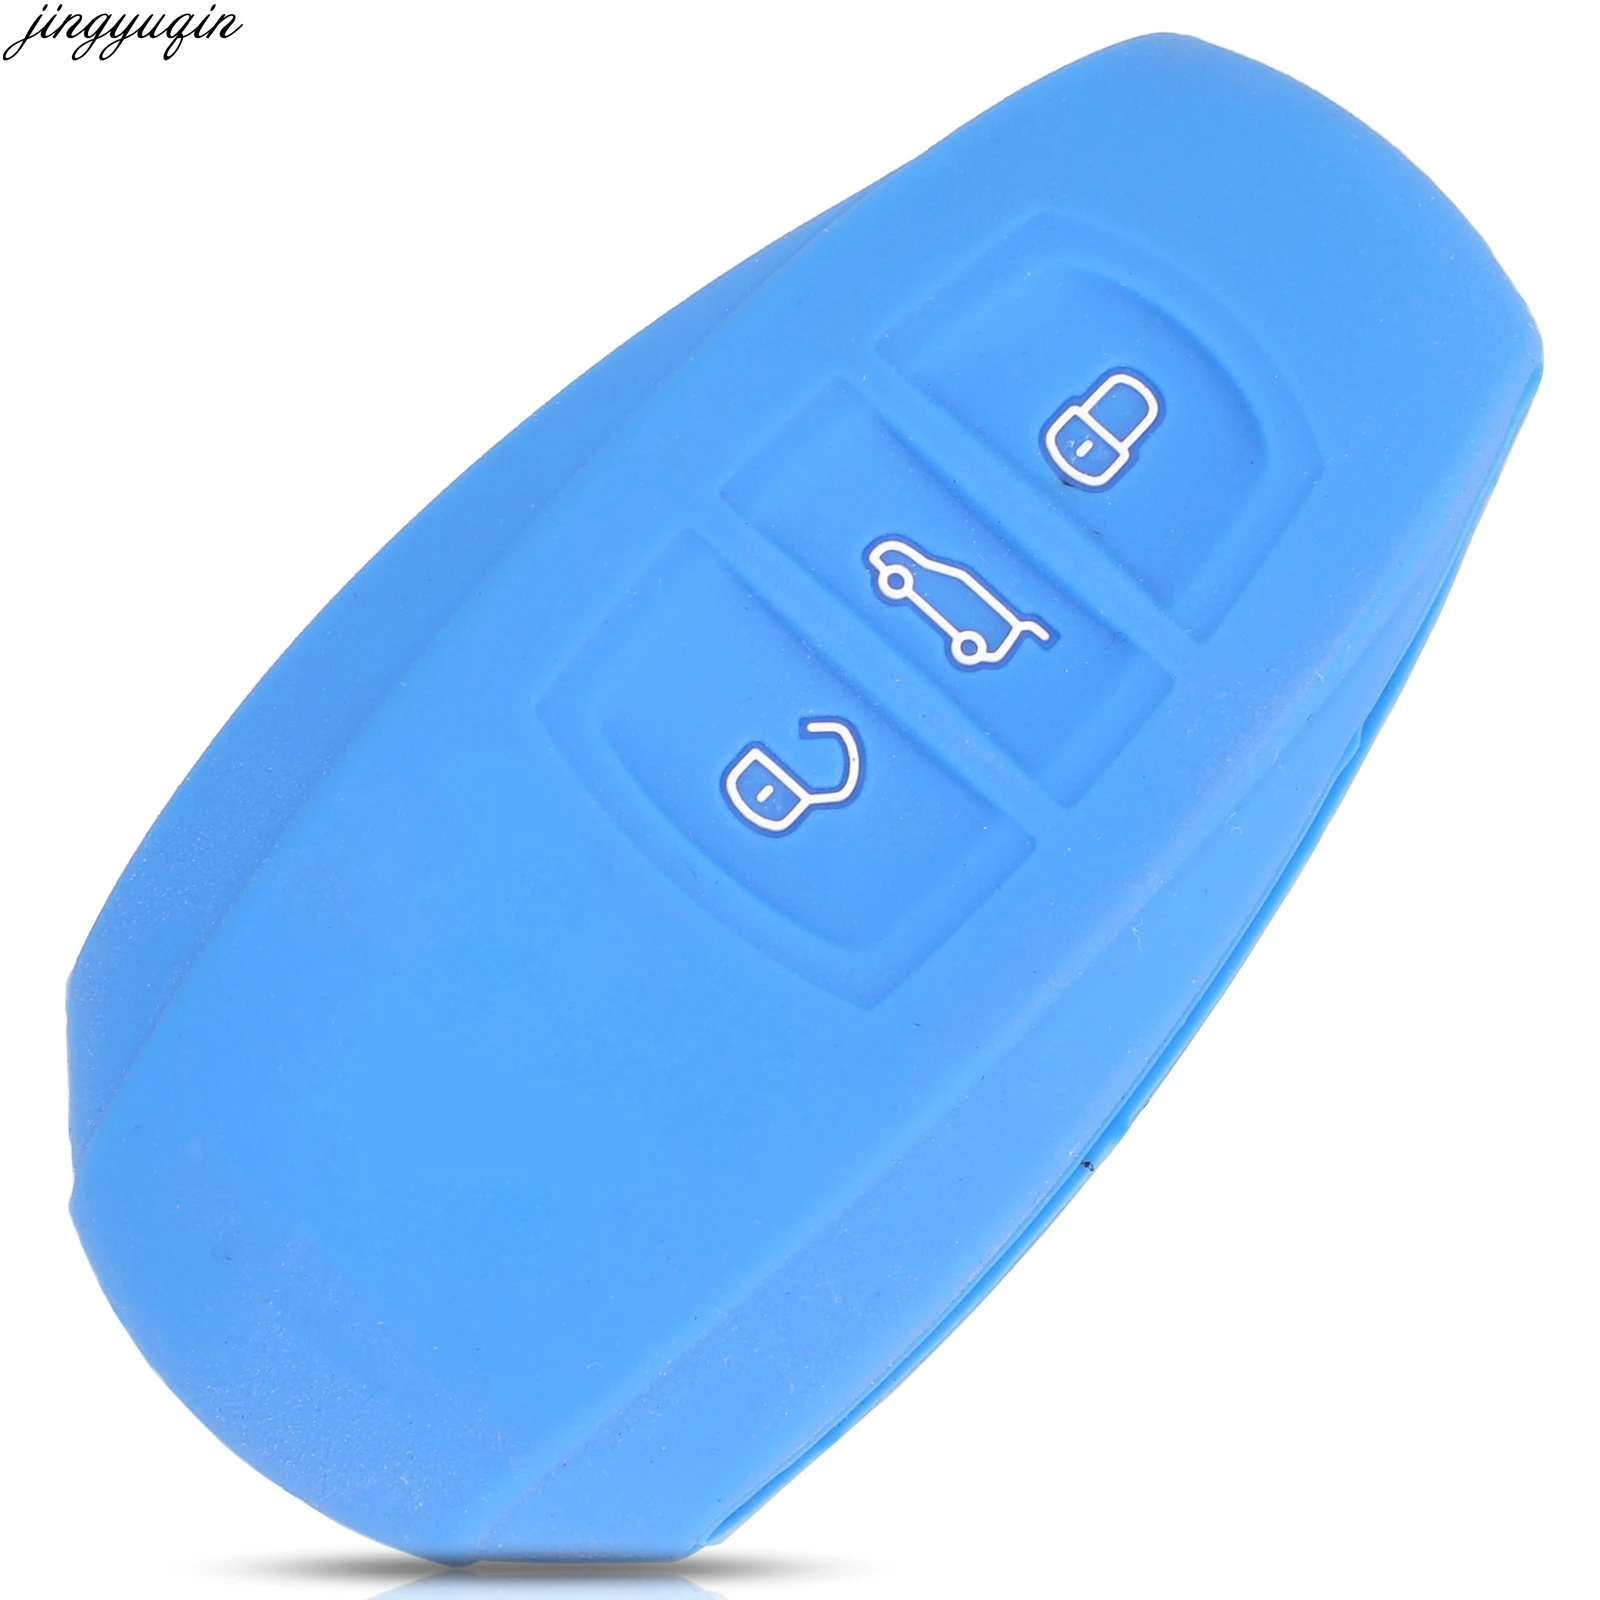 

Jingyuqin 30pcs Remote Car Key Silicone Cover Case For Volkswagen VW Touareg 3 Buttons Key Fob Holder Protection with Word